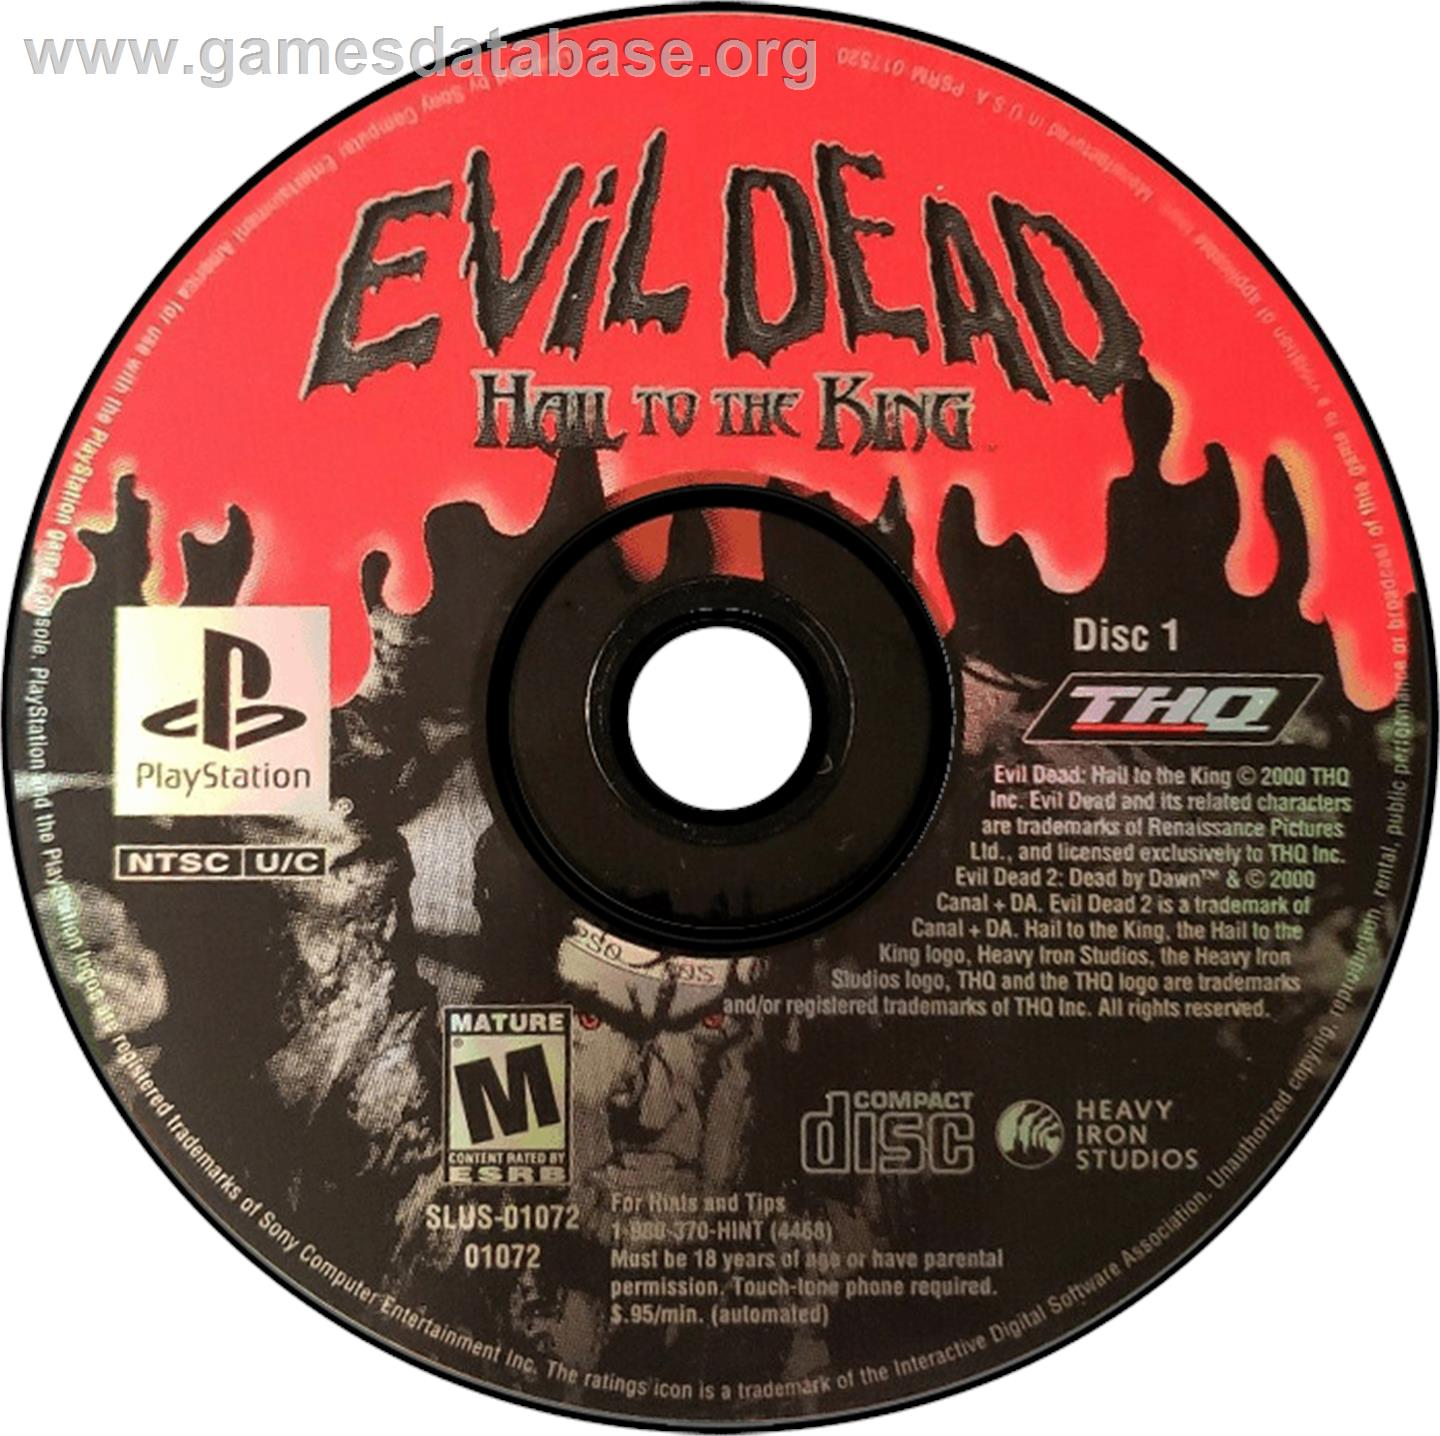 Evil Dead: Hail to the King - Sony Playstation - Artwork - Disc